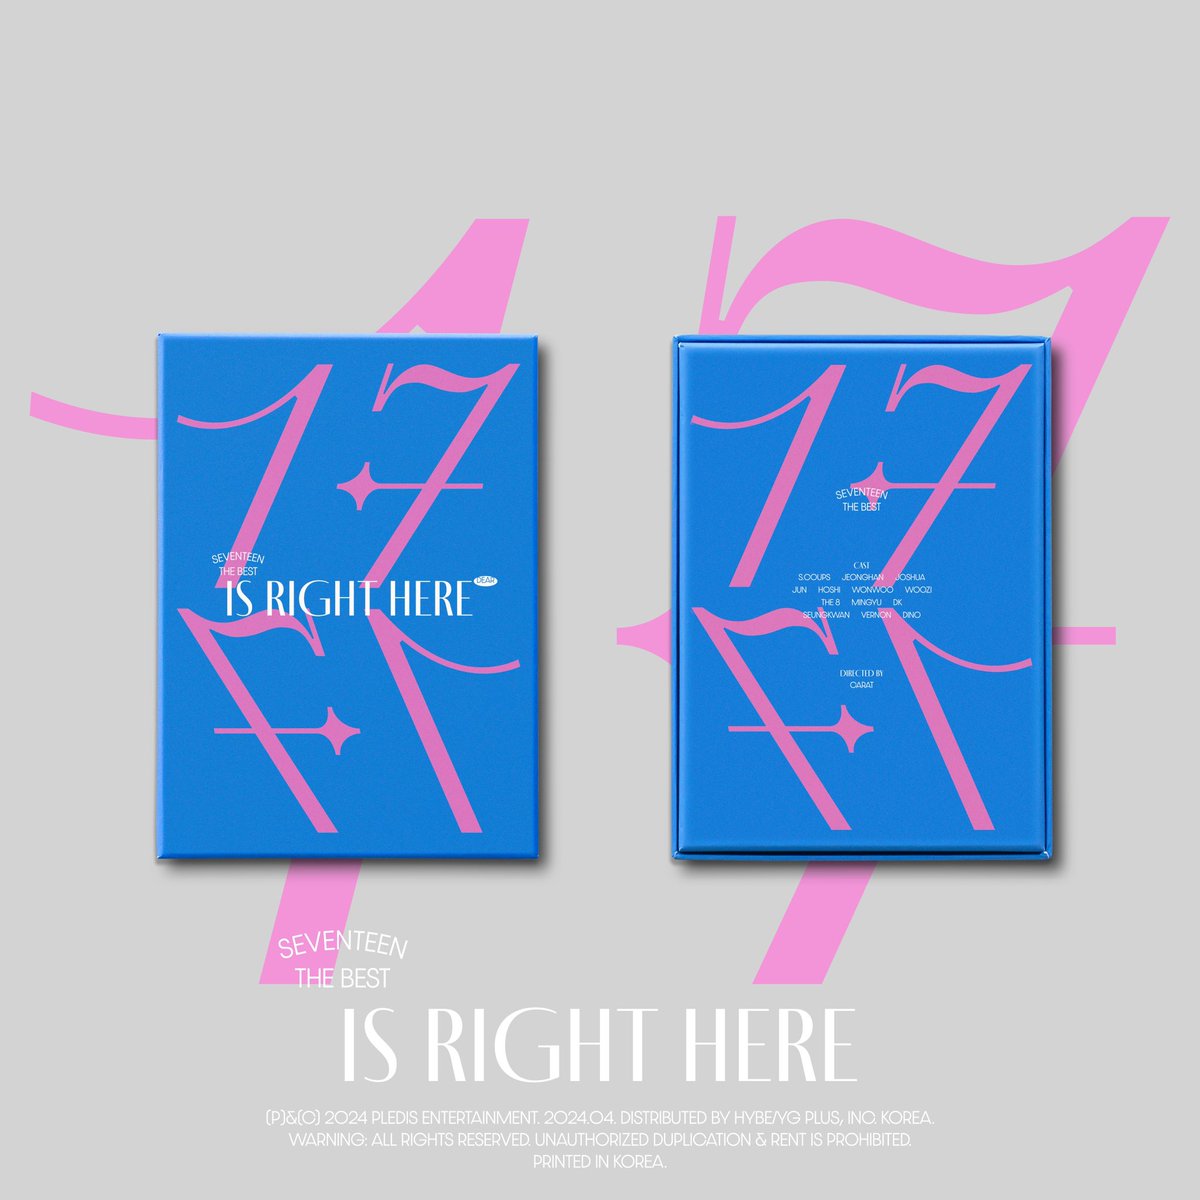 my first svt comeback giveaway~ 🥹

(1) winner of dear version sealed random album

to join:
- like and repost
- mbfm and @mrklauvekrtz
- reply any ot13 pic and mention at least two moots
- must be willing to wait and shoulder sf

ends on May 31